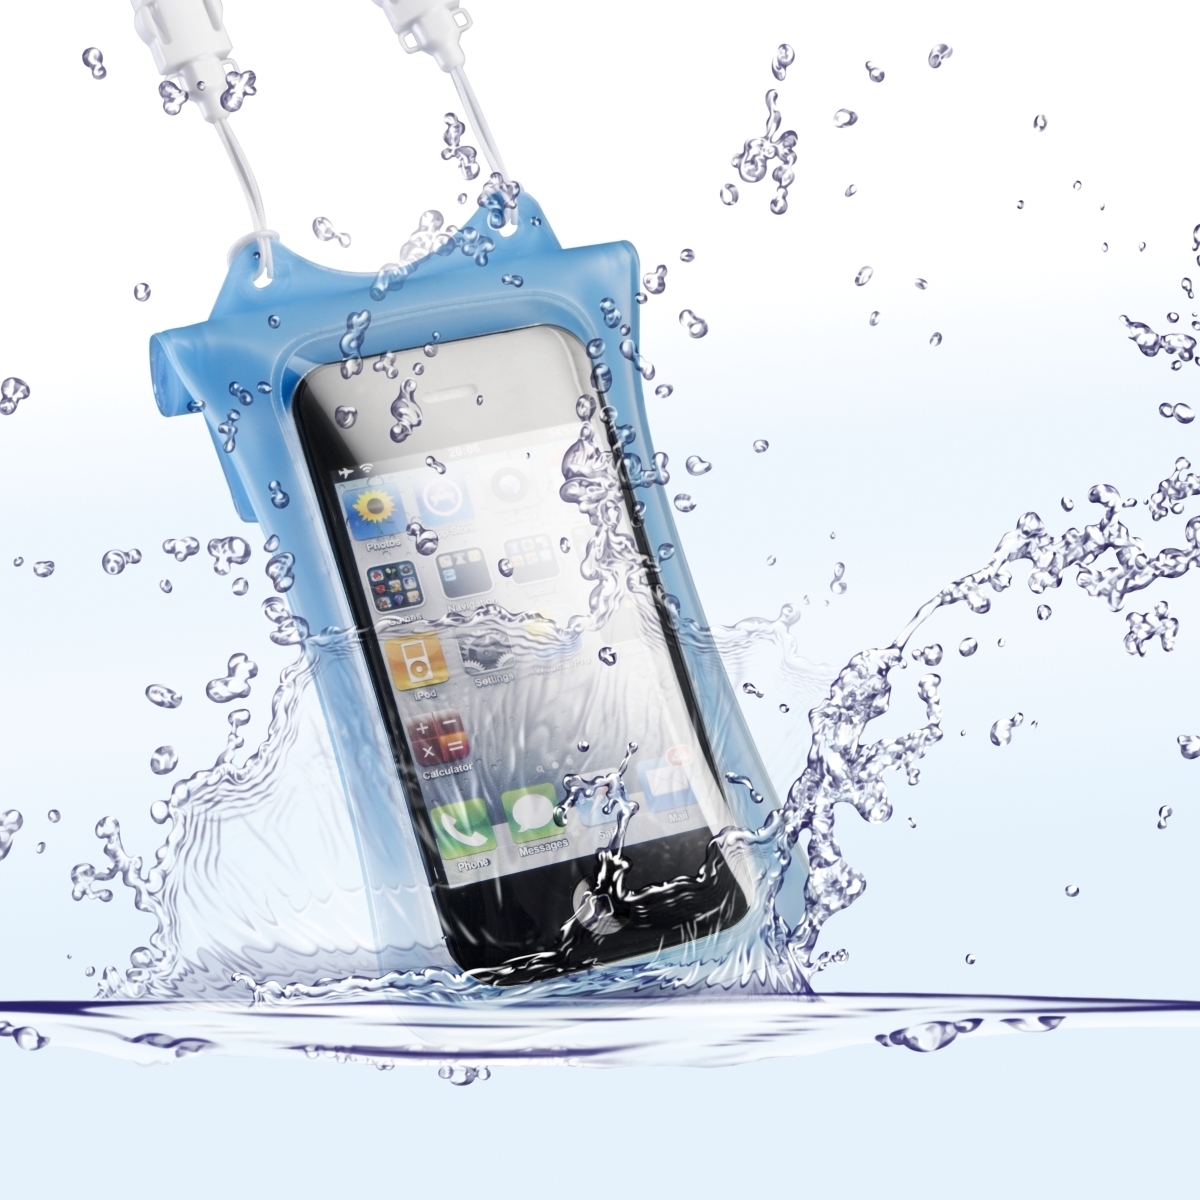 WP-i10 Underwater Bag for iPhone & iPod, blue